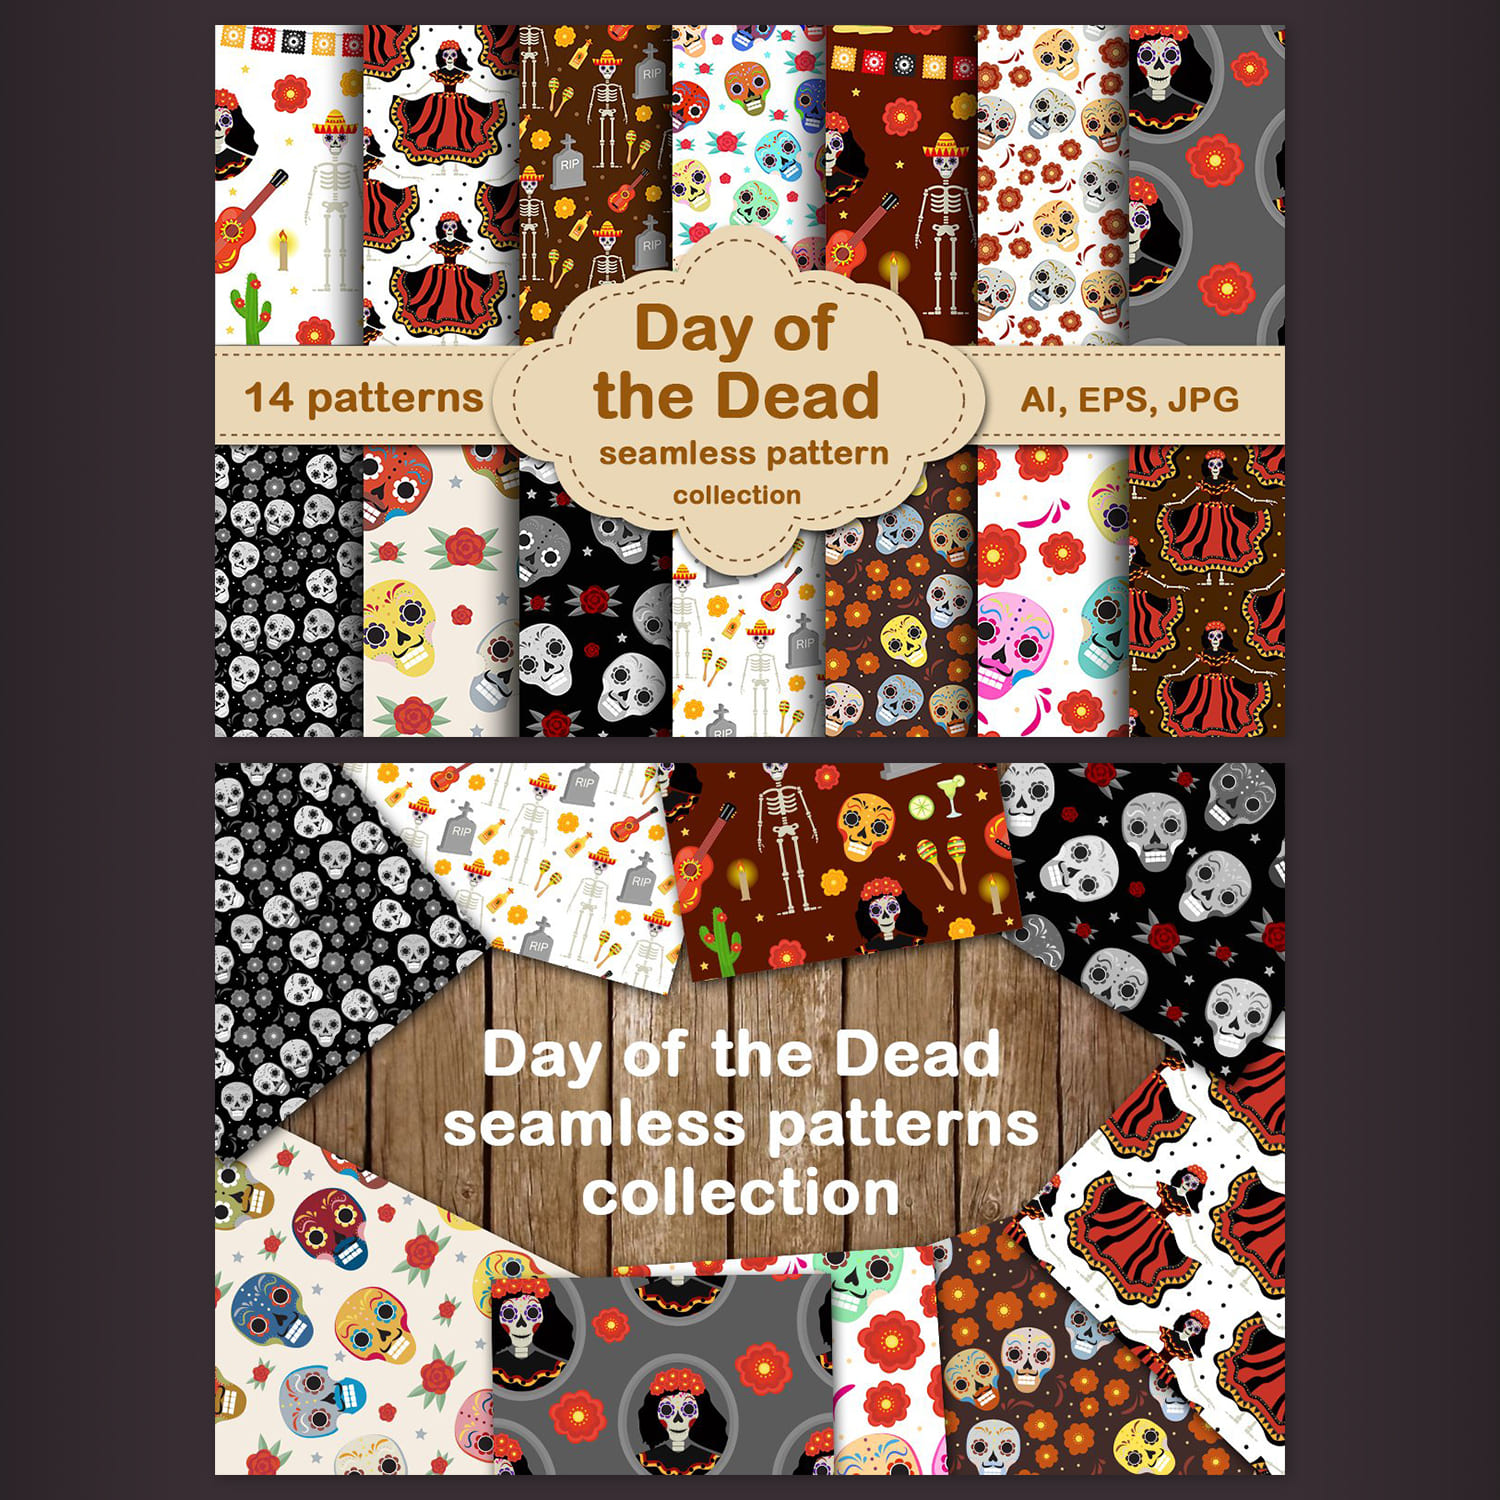 Day of the dead seamless patterns cover.